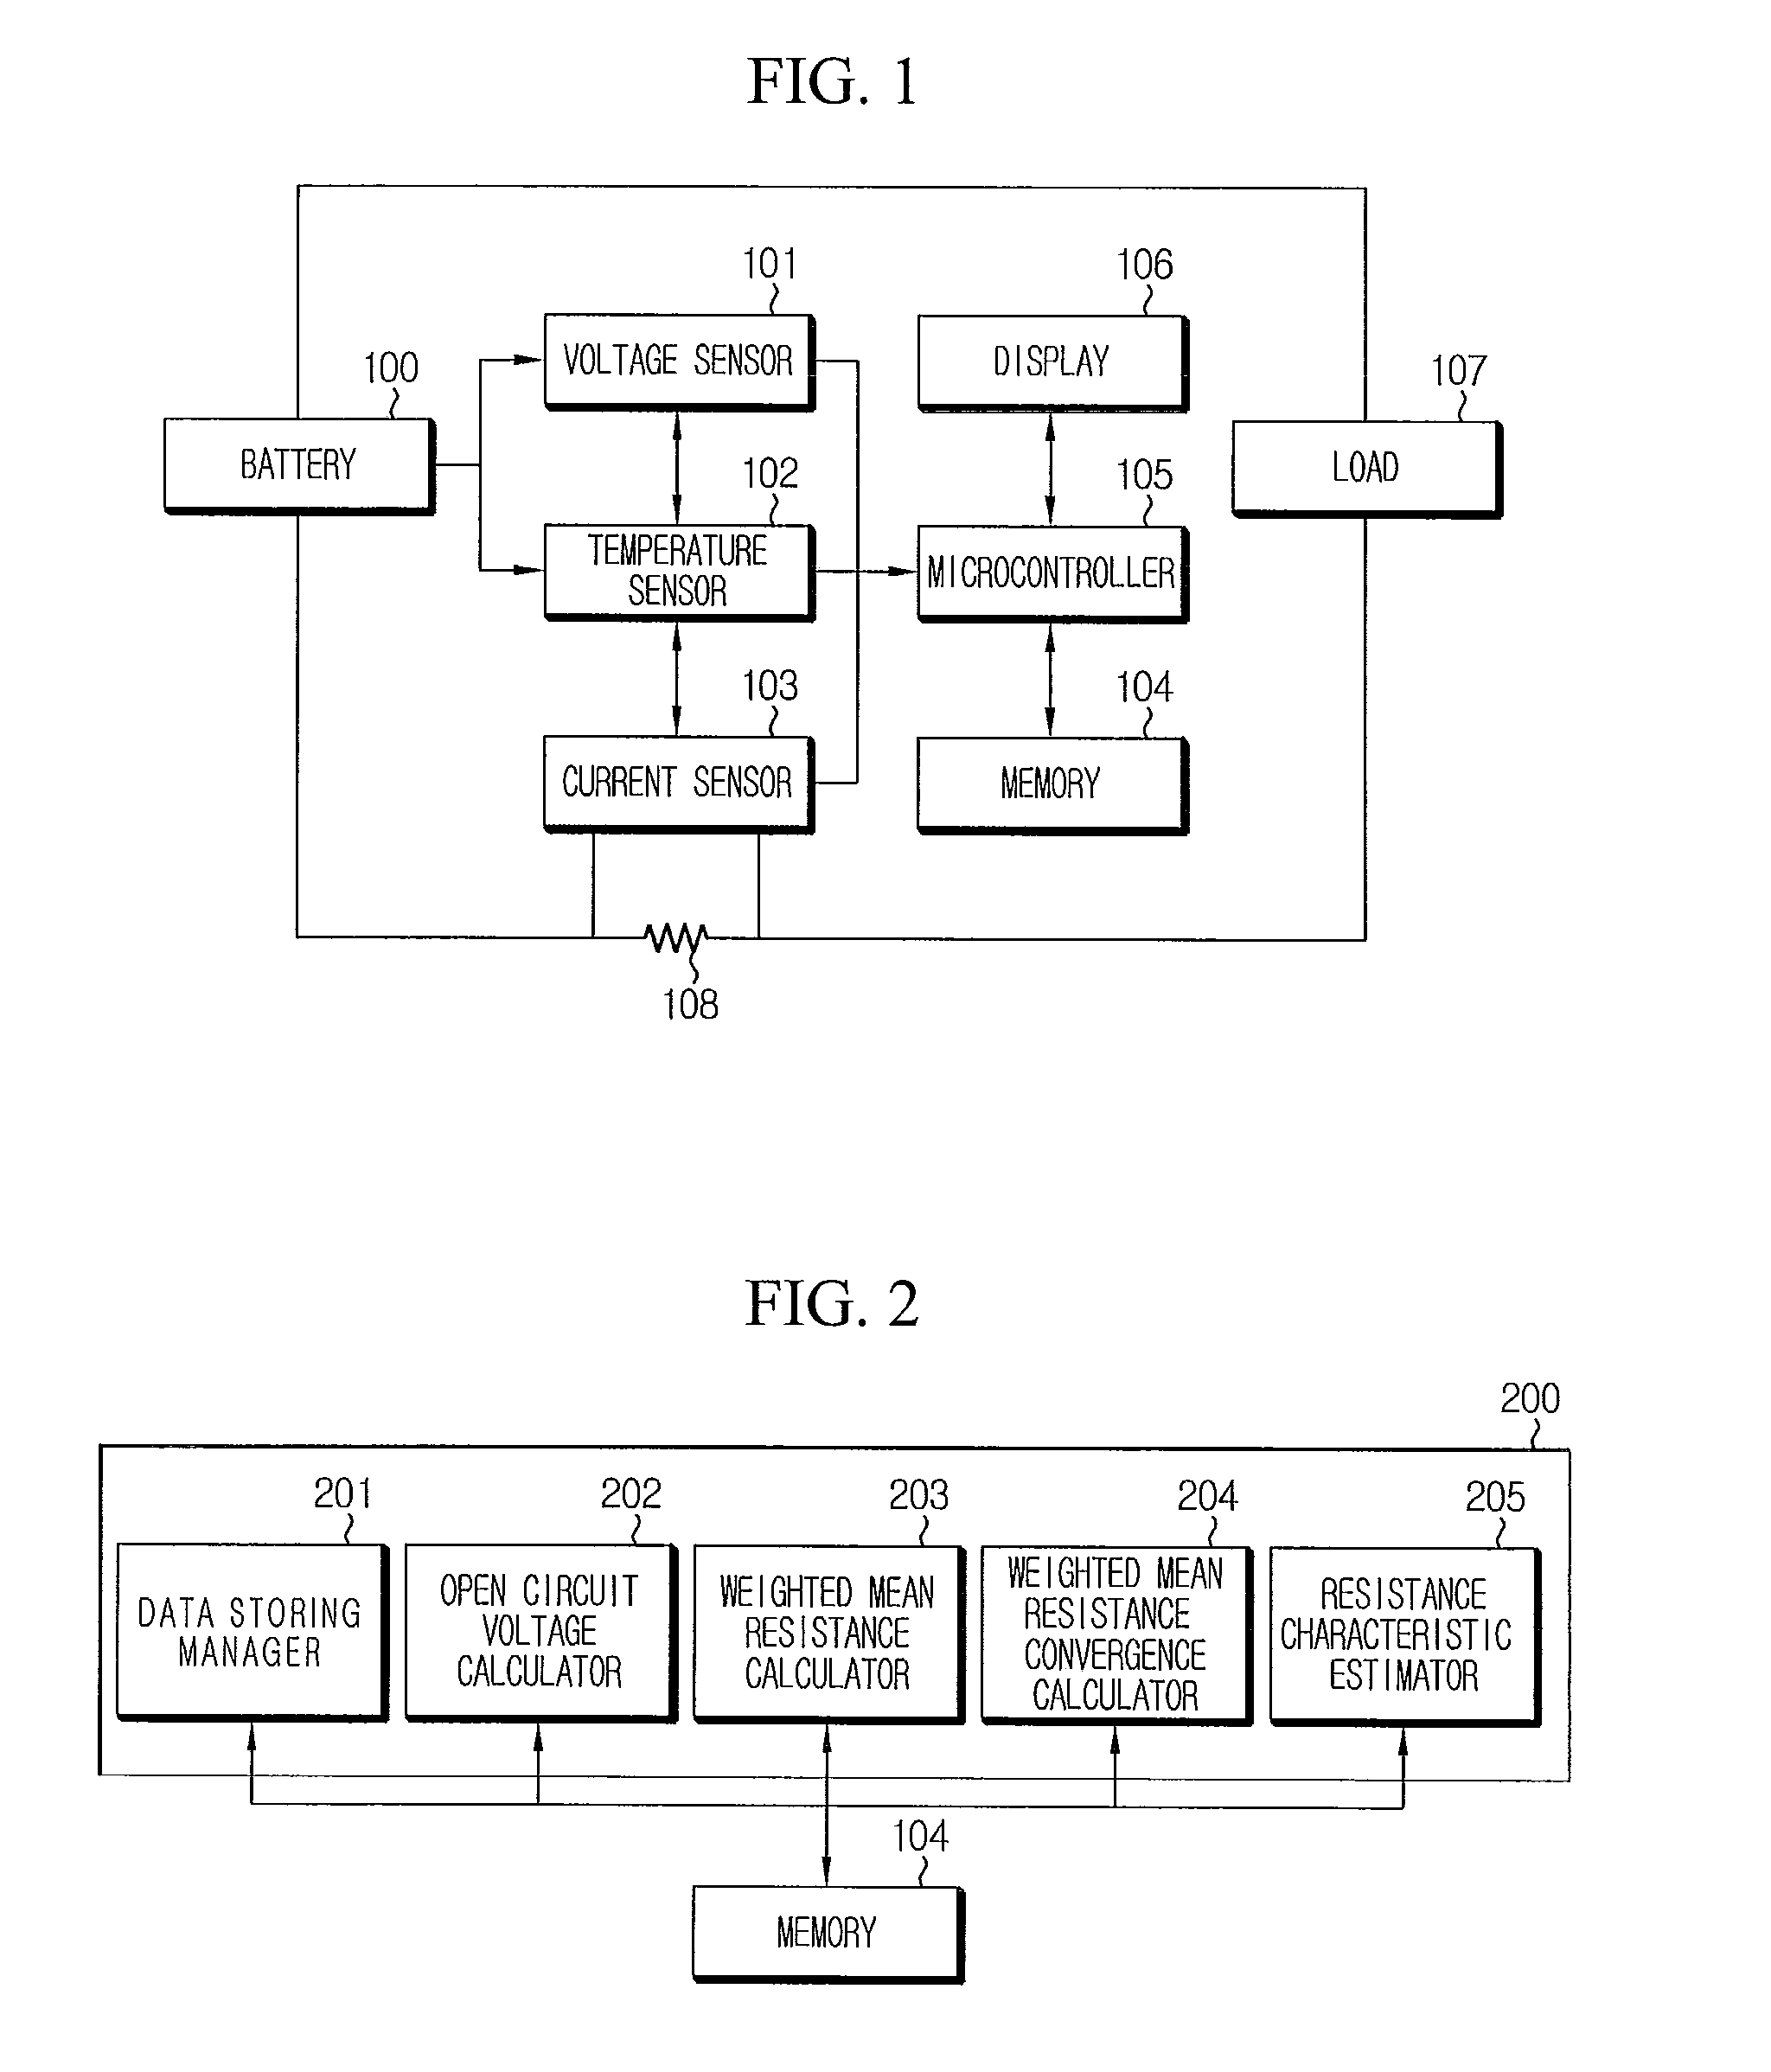 Apparatus and method for estimating resistance characteristics of battery based on open circuit voltage estimated by battery voltage variation pattern